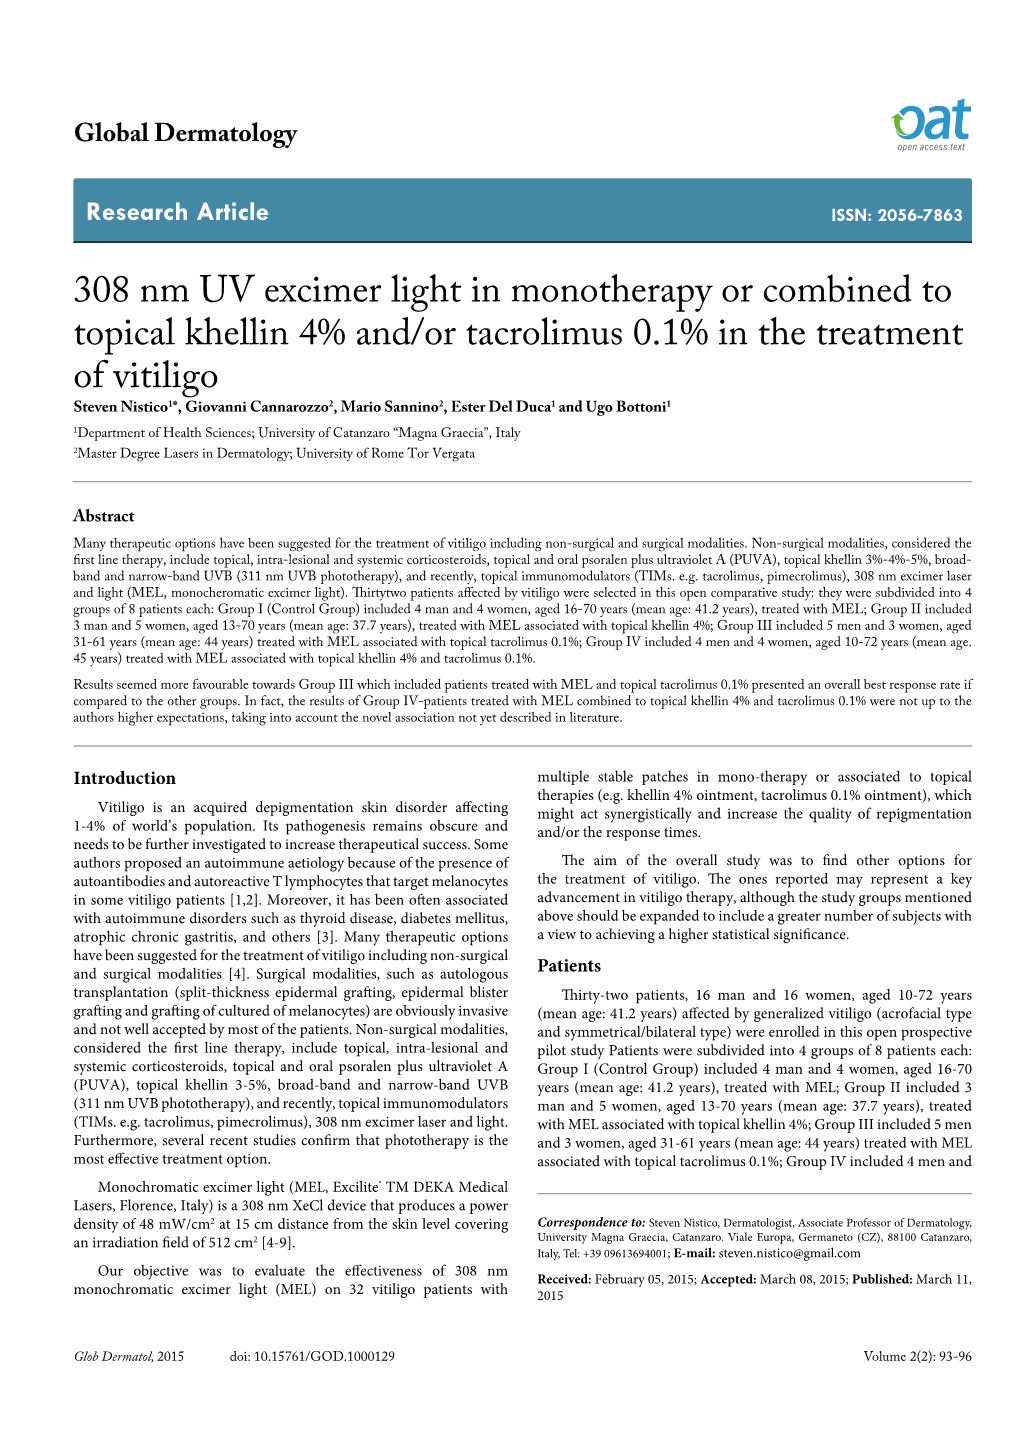 308 Nm UV Excimer Light in Monotherapy Or Combined to Topical Khellin 4% And/Or Tacrolimus 0.1% in the Treatment